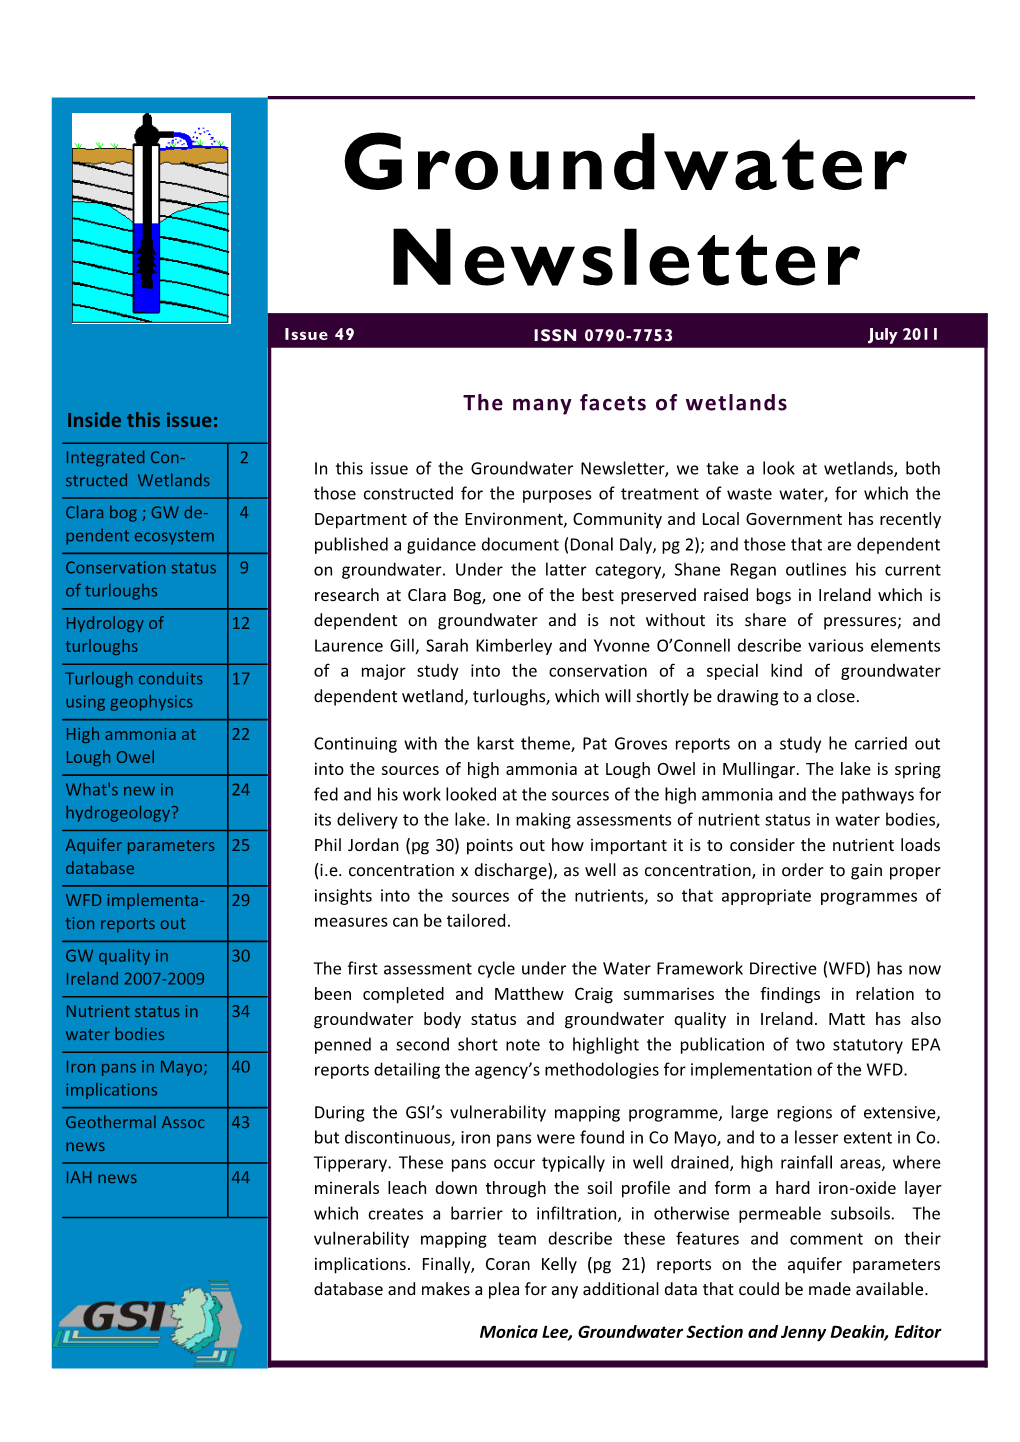 Groundwater Newsletter